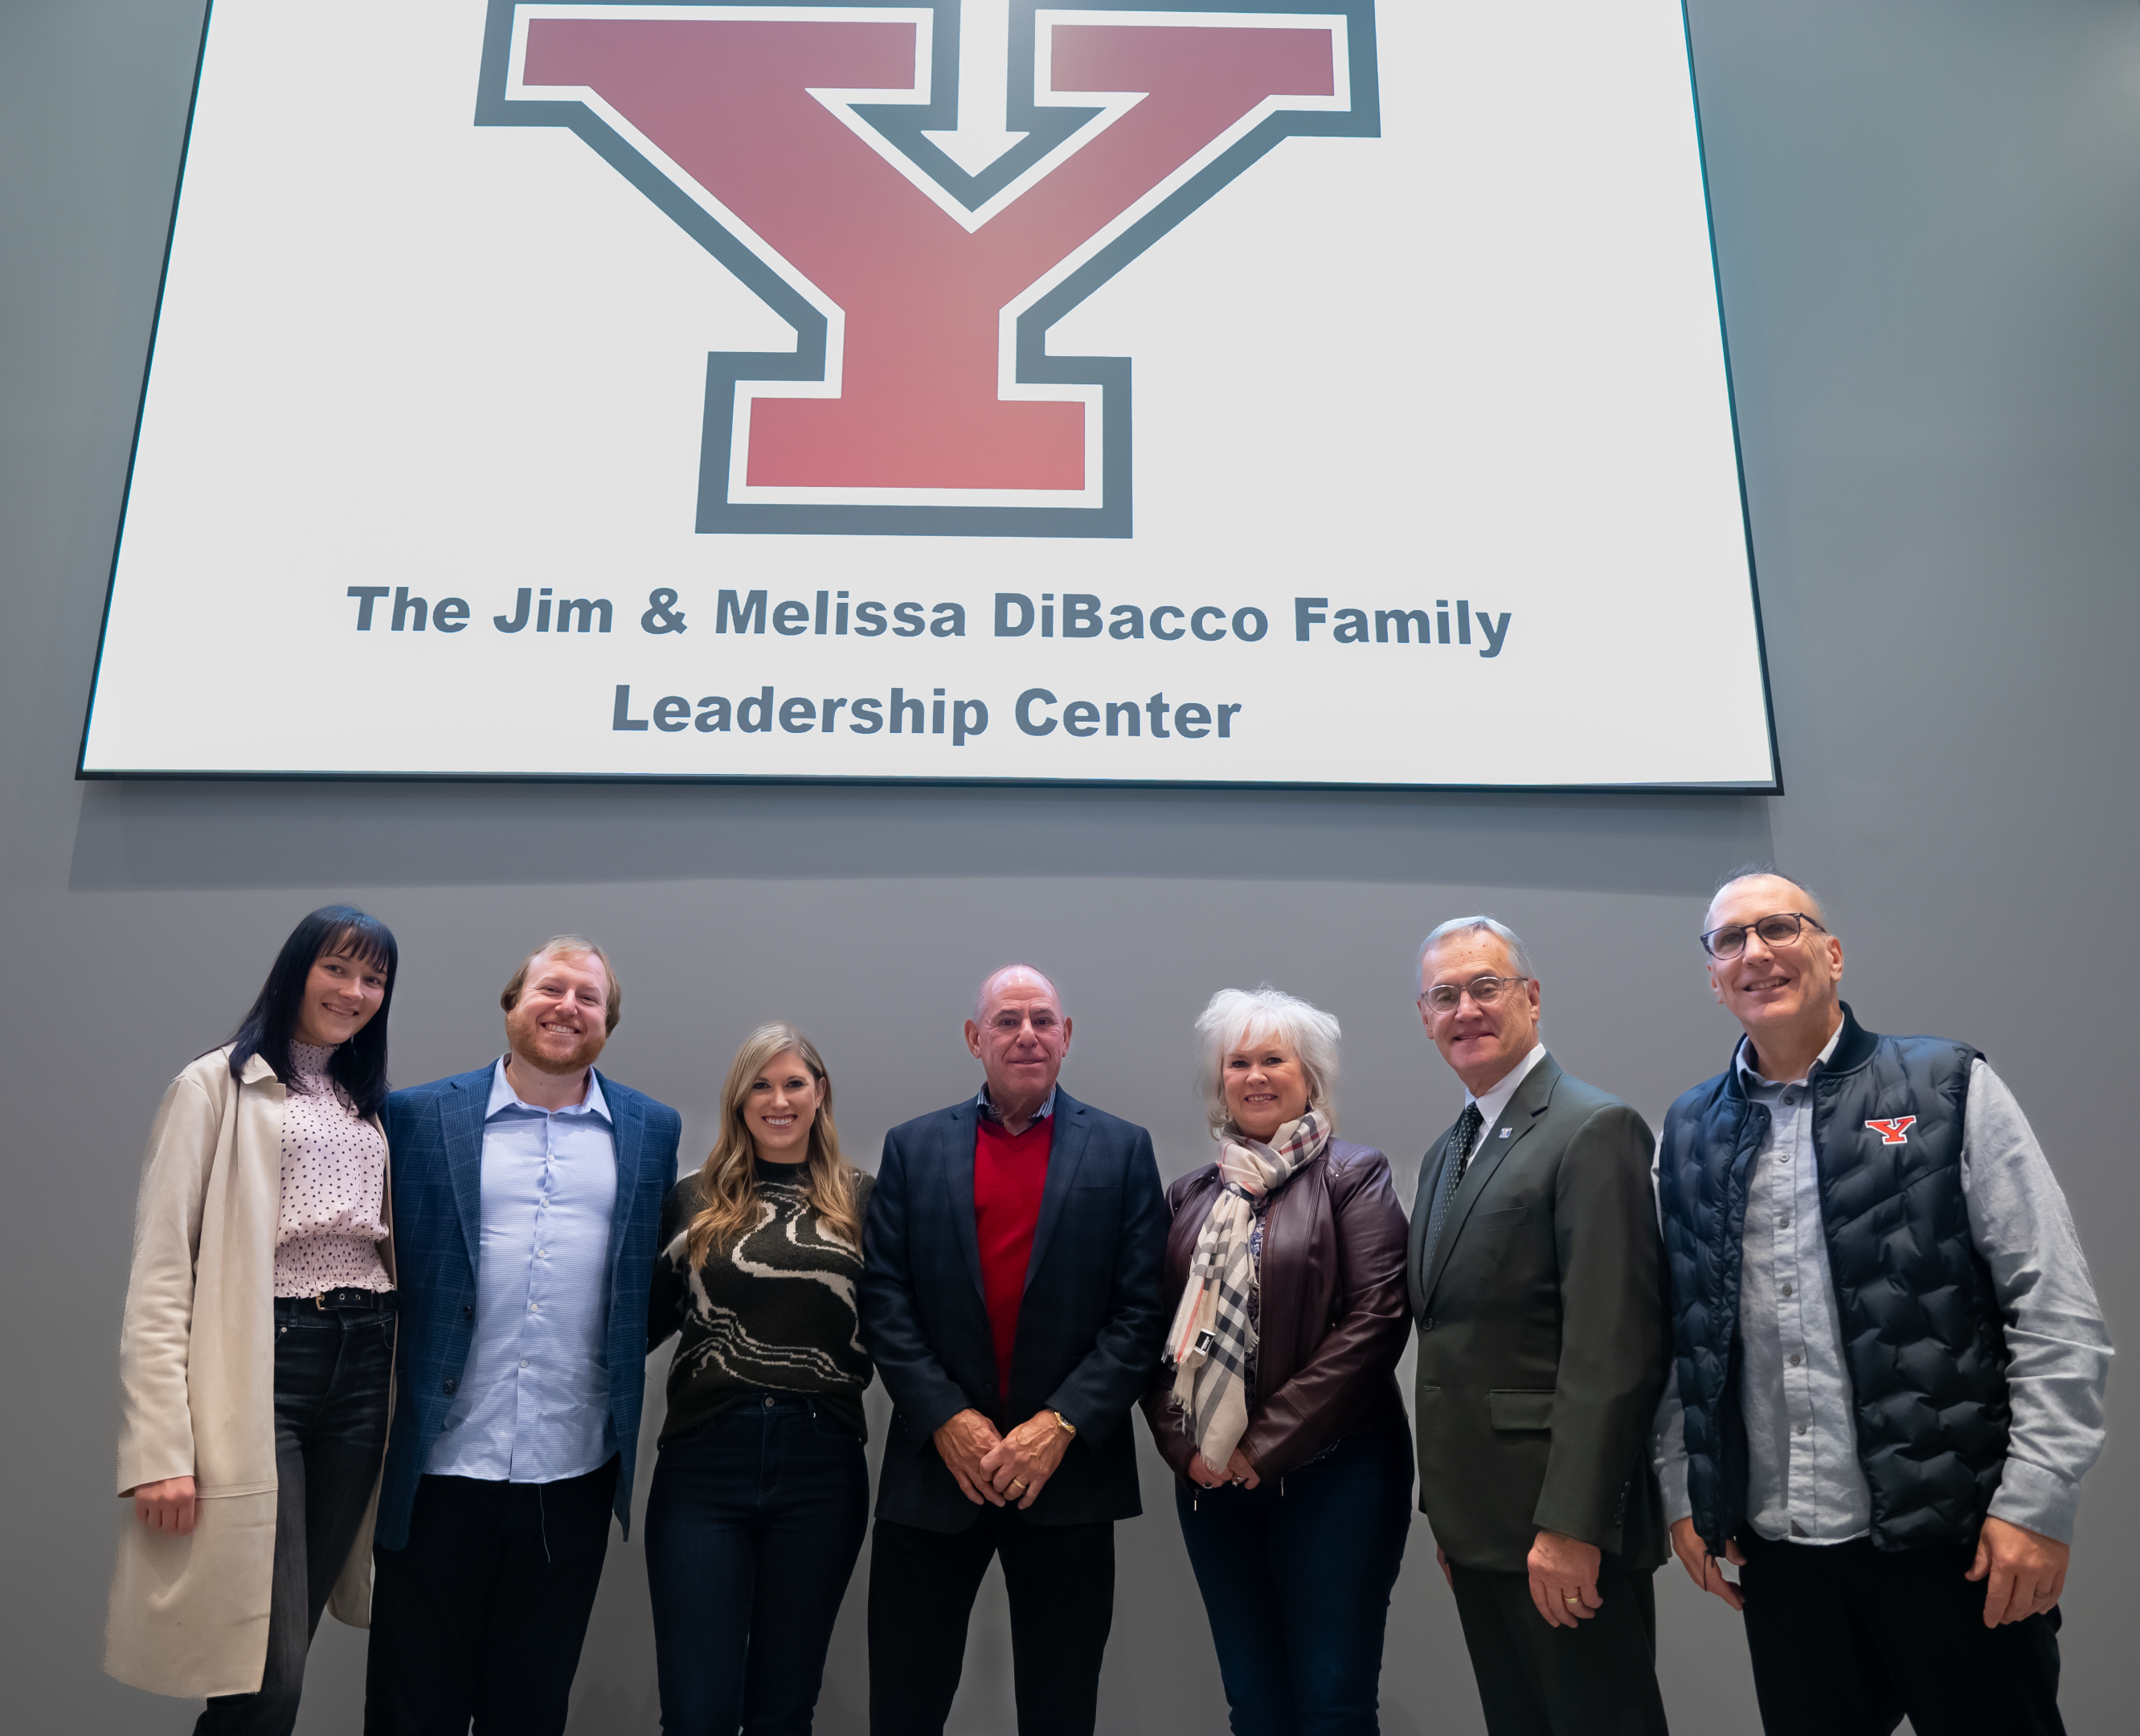 The DiBacco family with President Tressel and Coach Phillips